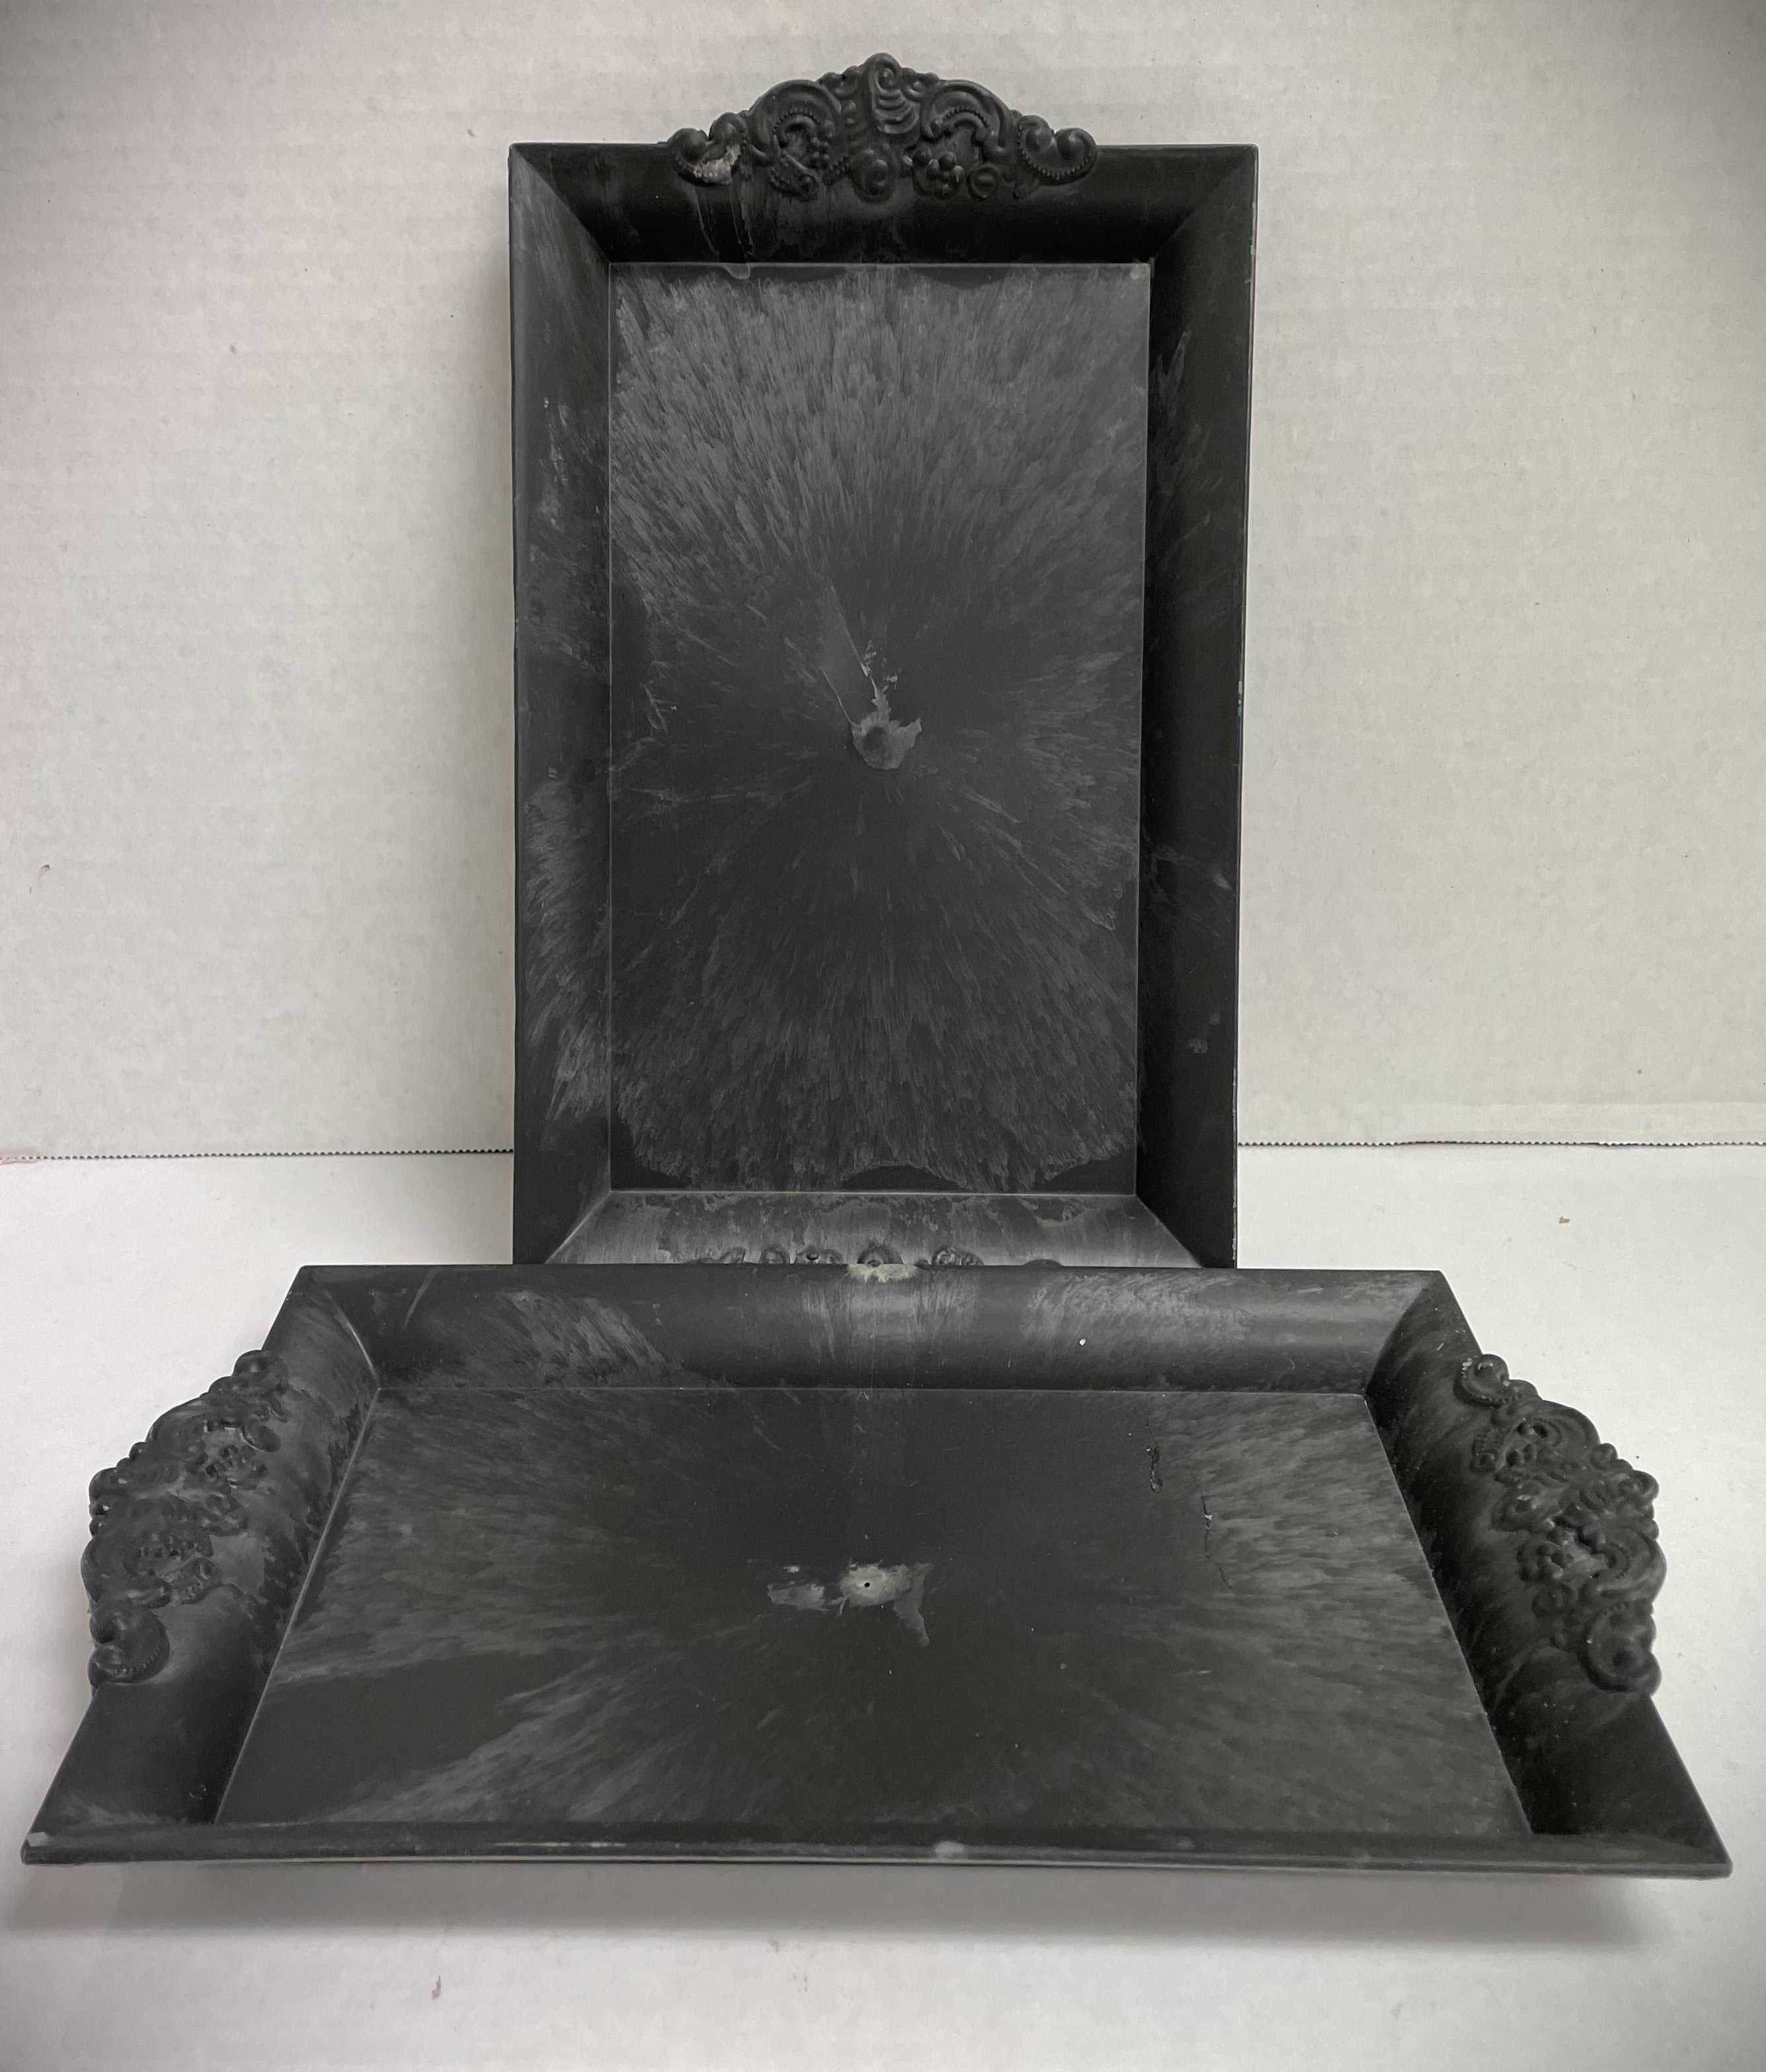 Small Black Serving Tray